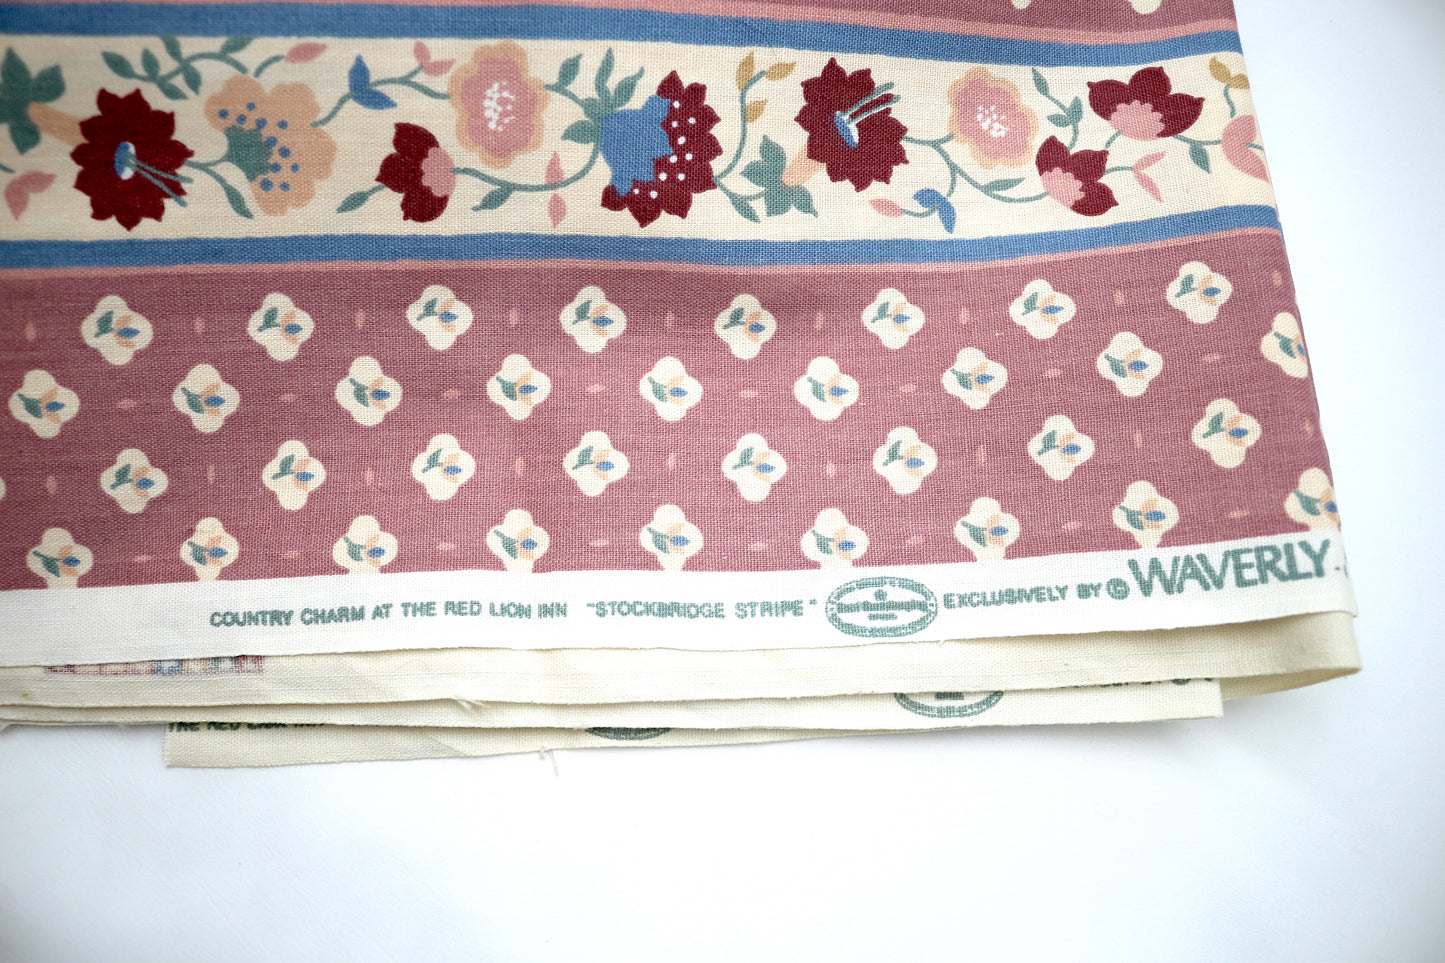 Vintage Waverly Upholstery Cotton Fabric 49" x 6.5 yds